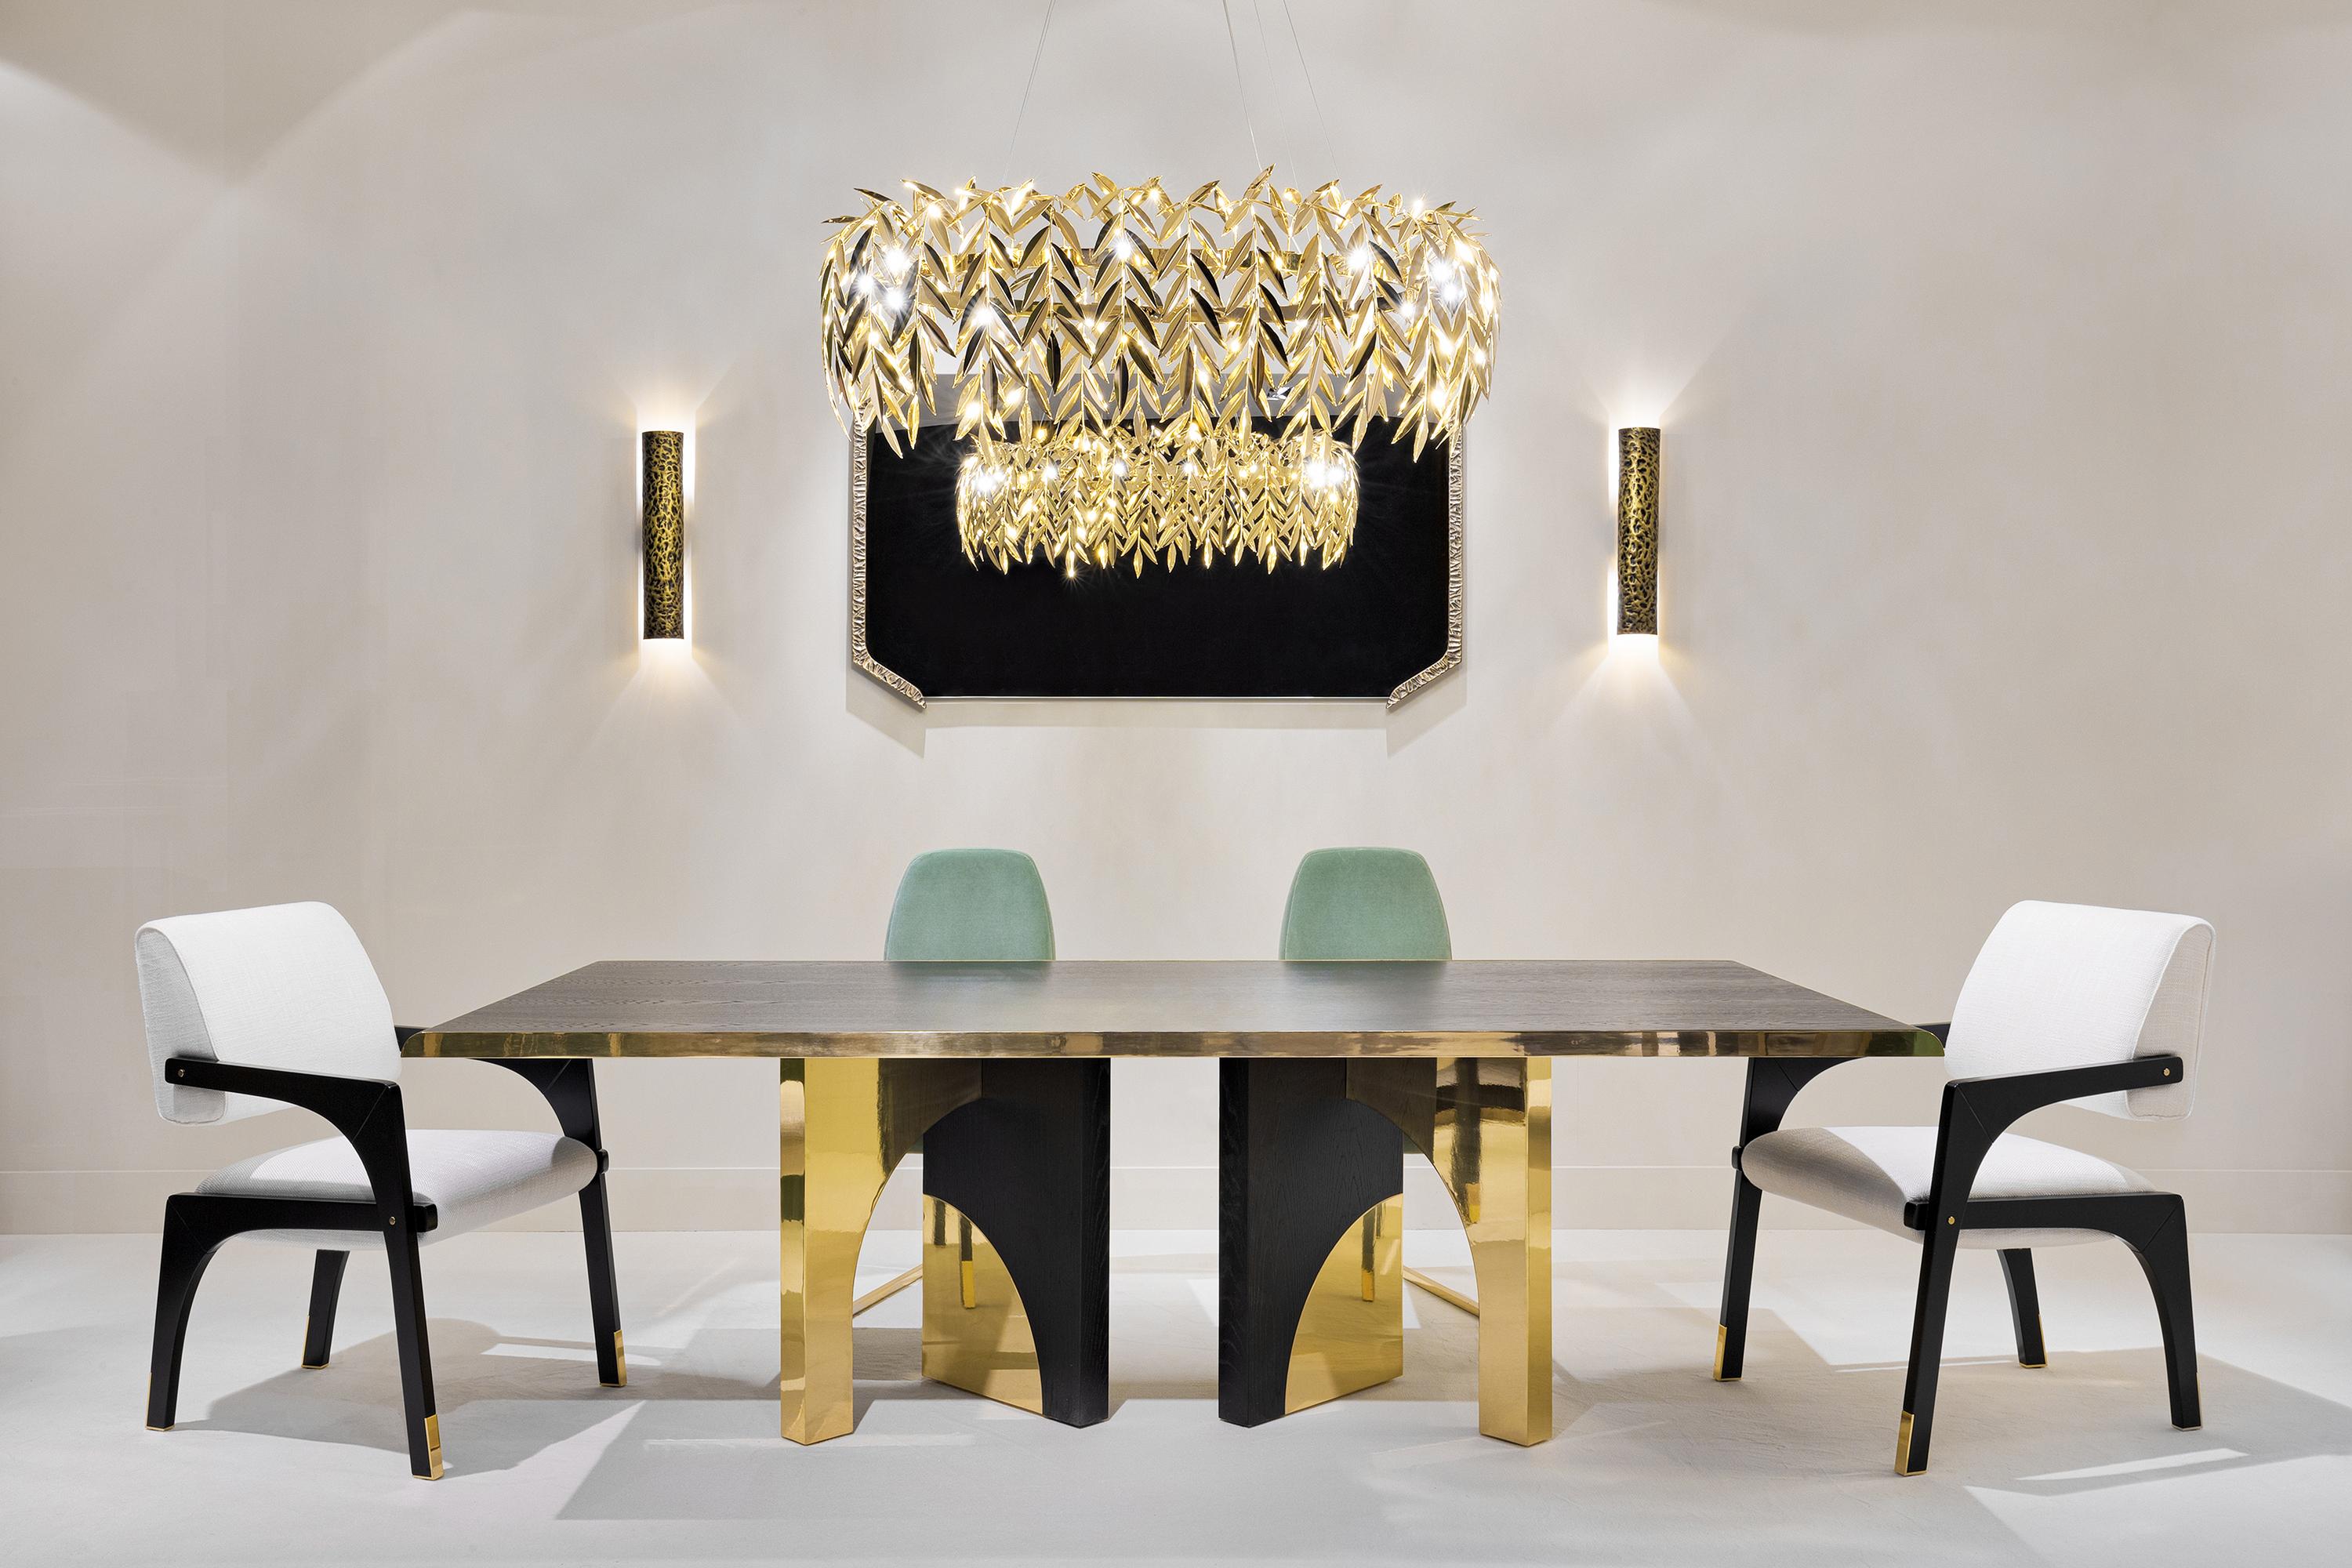 Contemporary Arches Dining Chair, Brass, InsidherLand by Joana Santos Barbosa